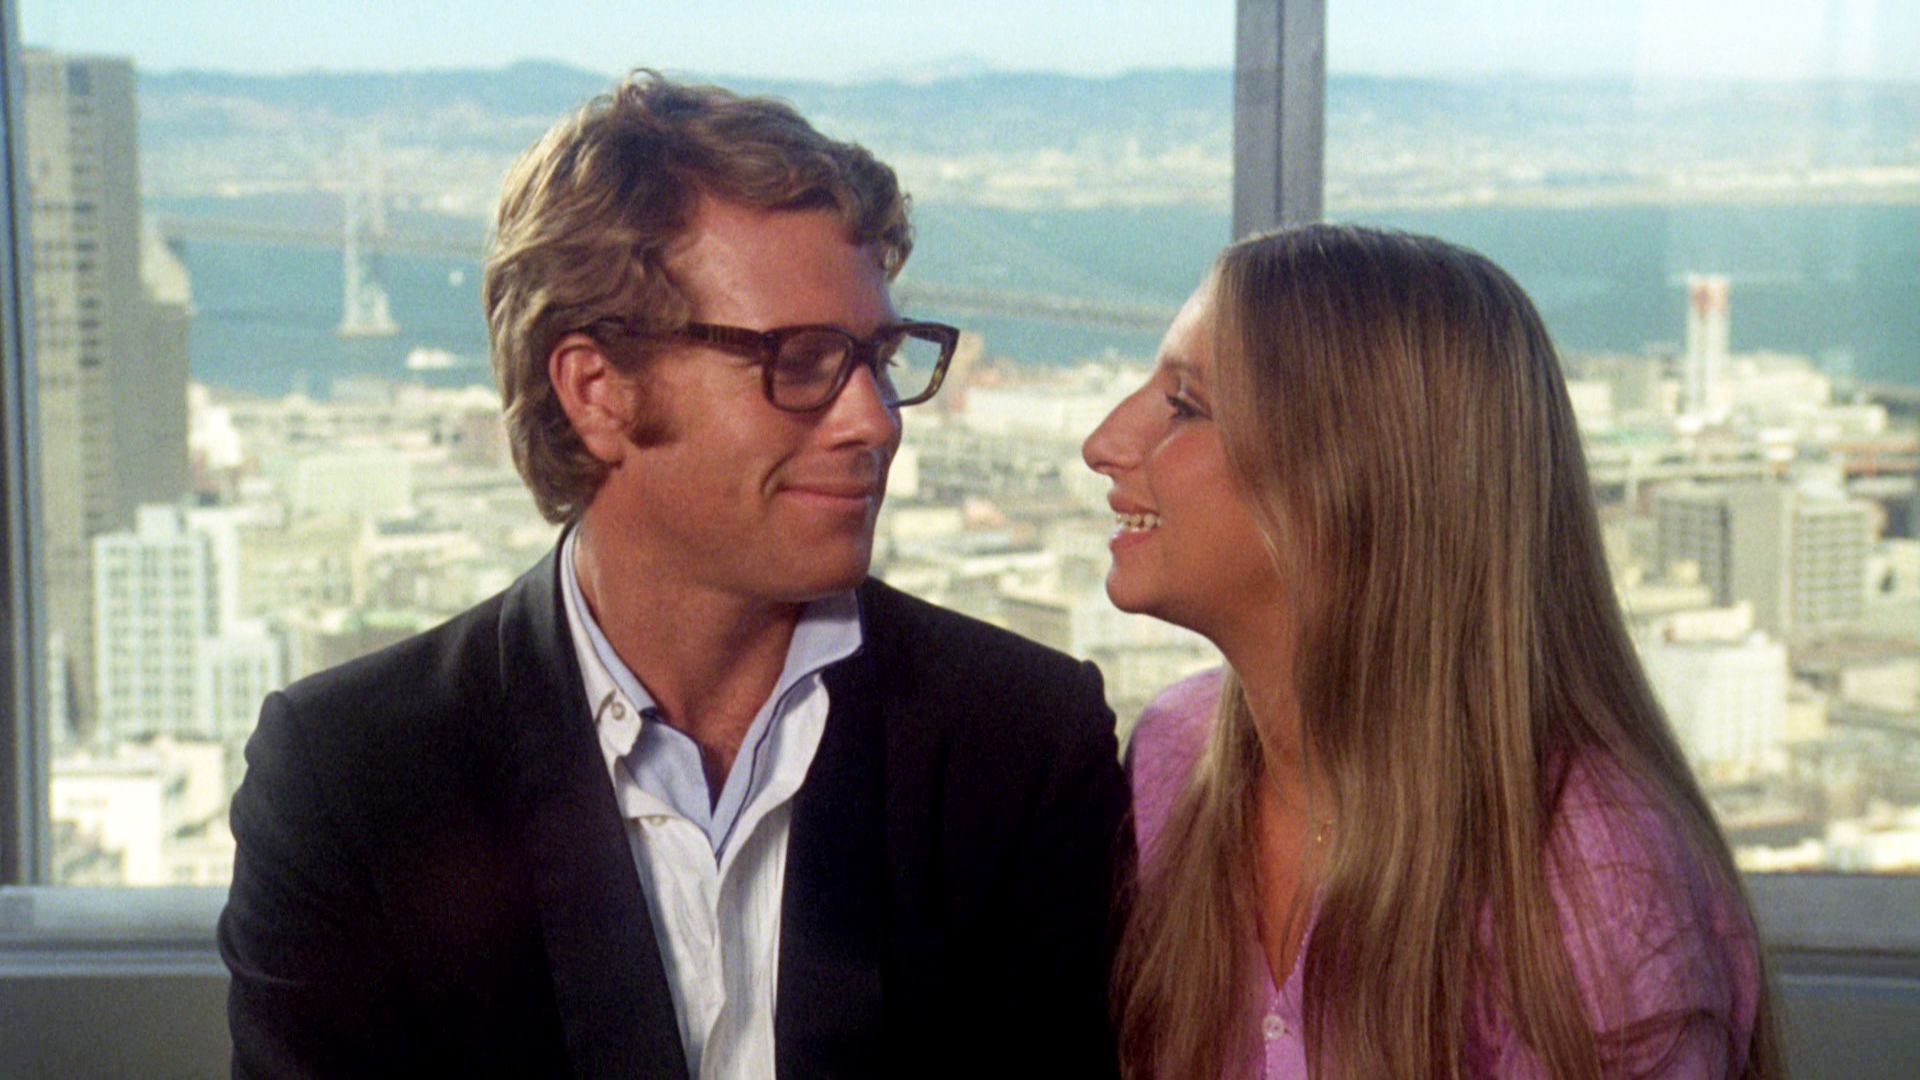 Ryan O'Neal and Barbra Streisand on screen in the film comedy What's Up Doc?